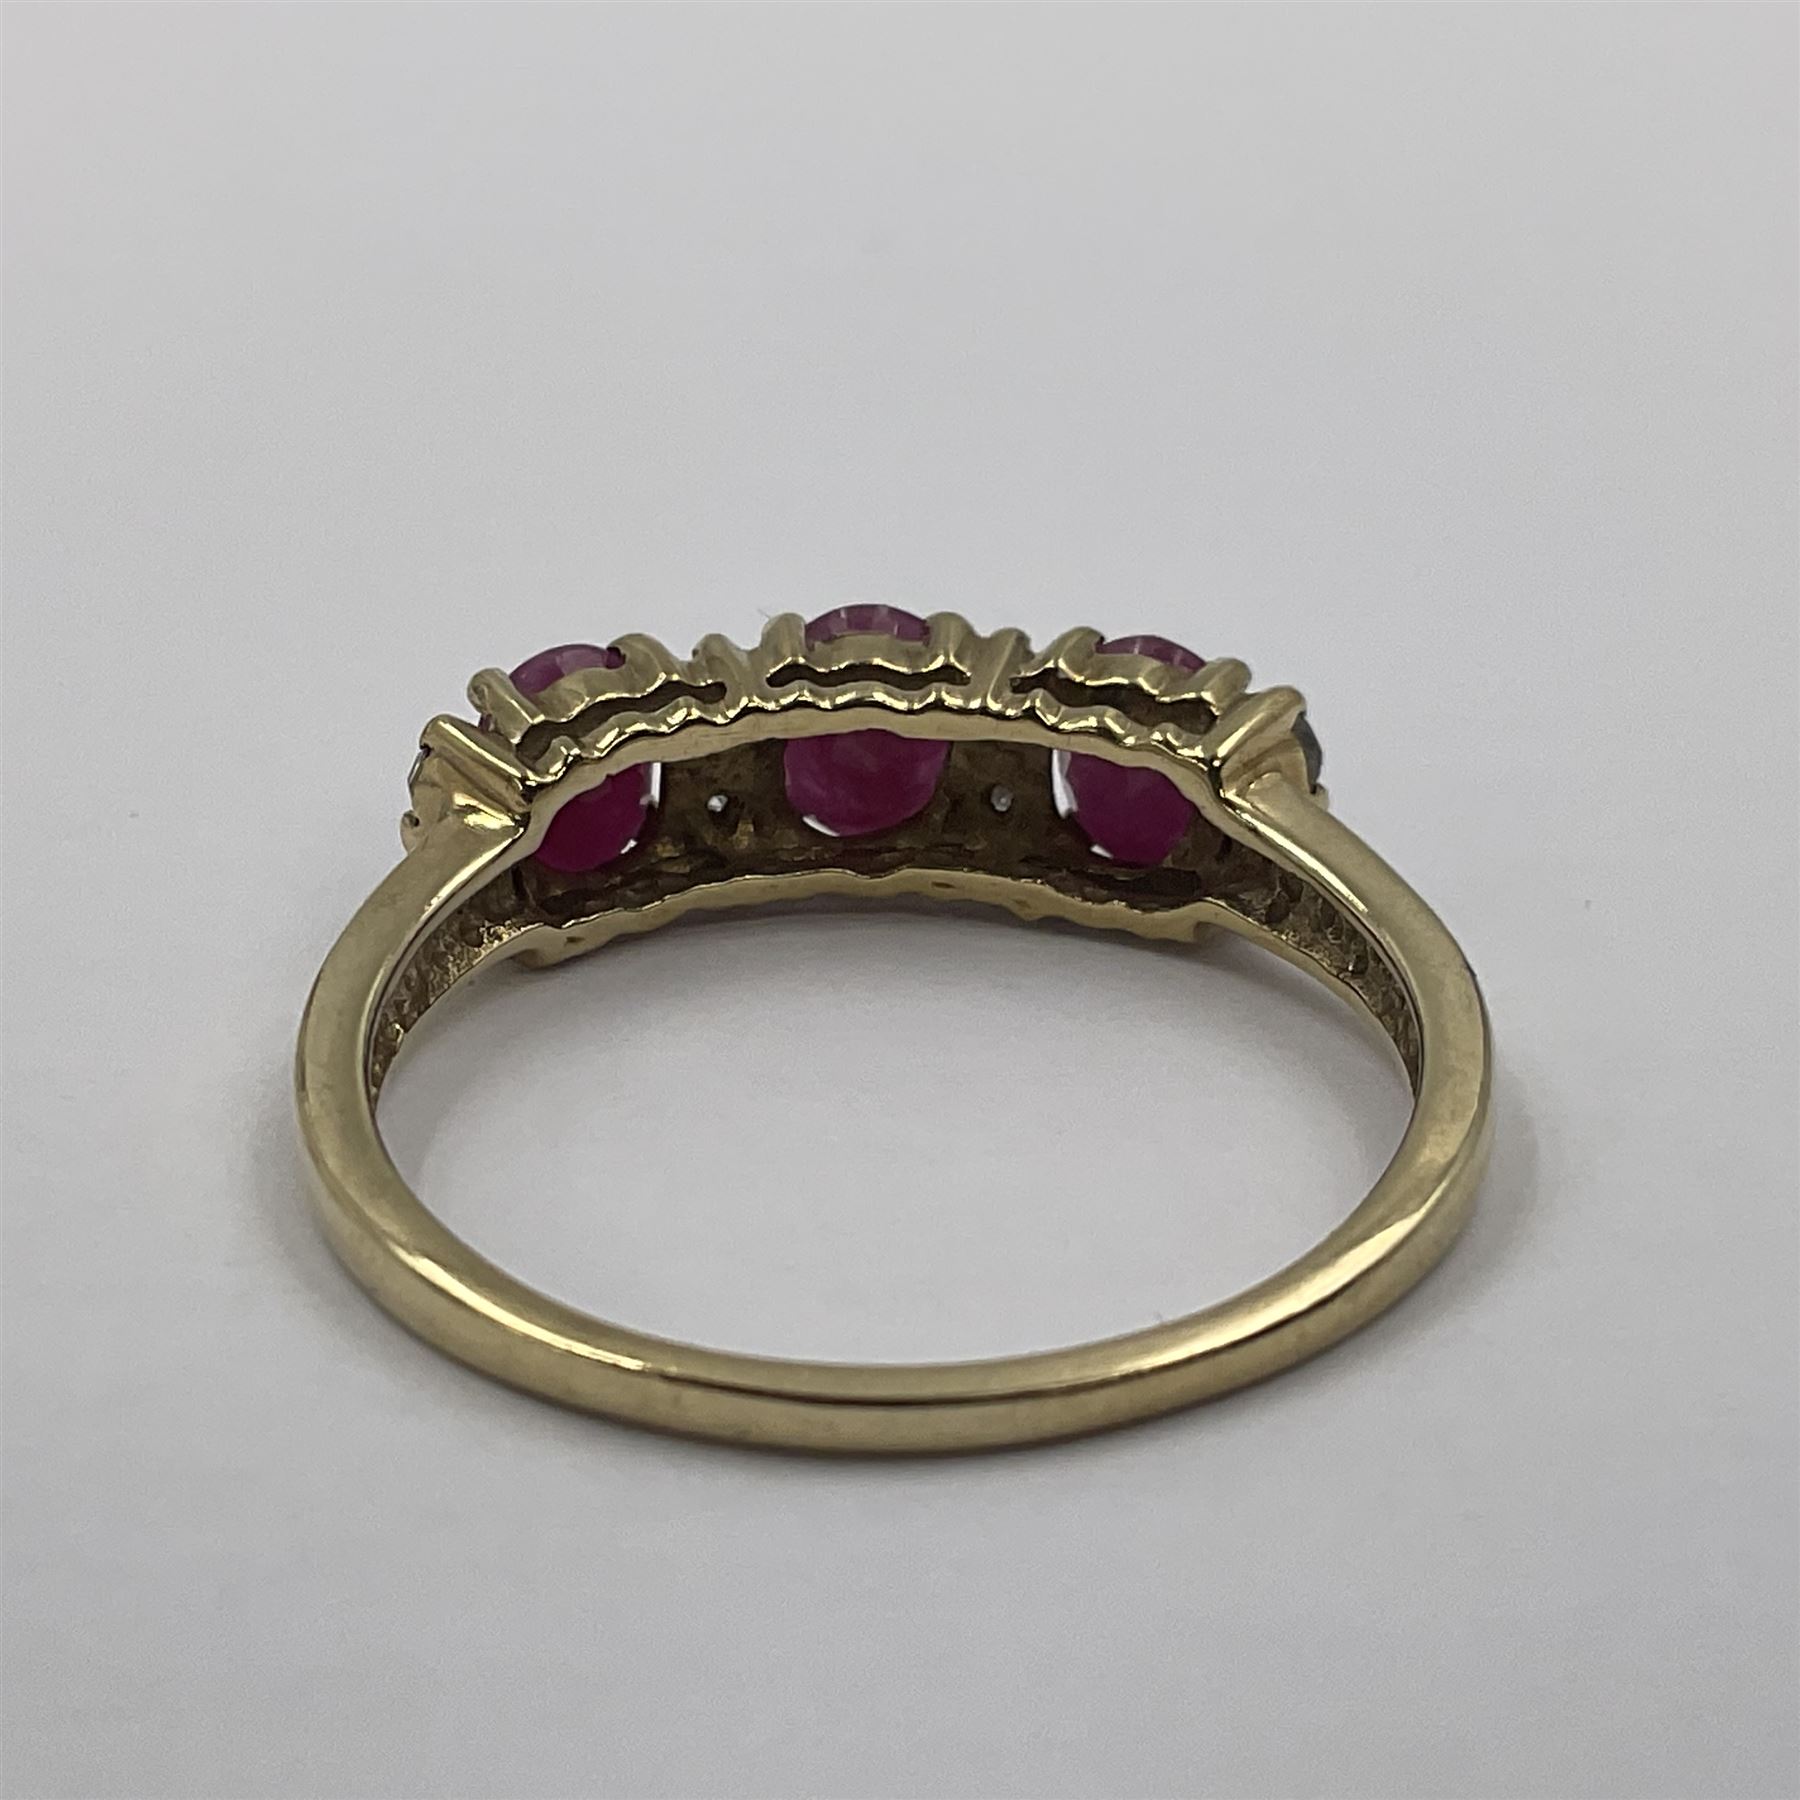 9ct gold three stone oval ruby and cubic zirconia ring - Image 5 of 5